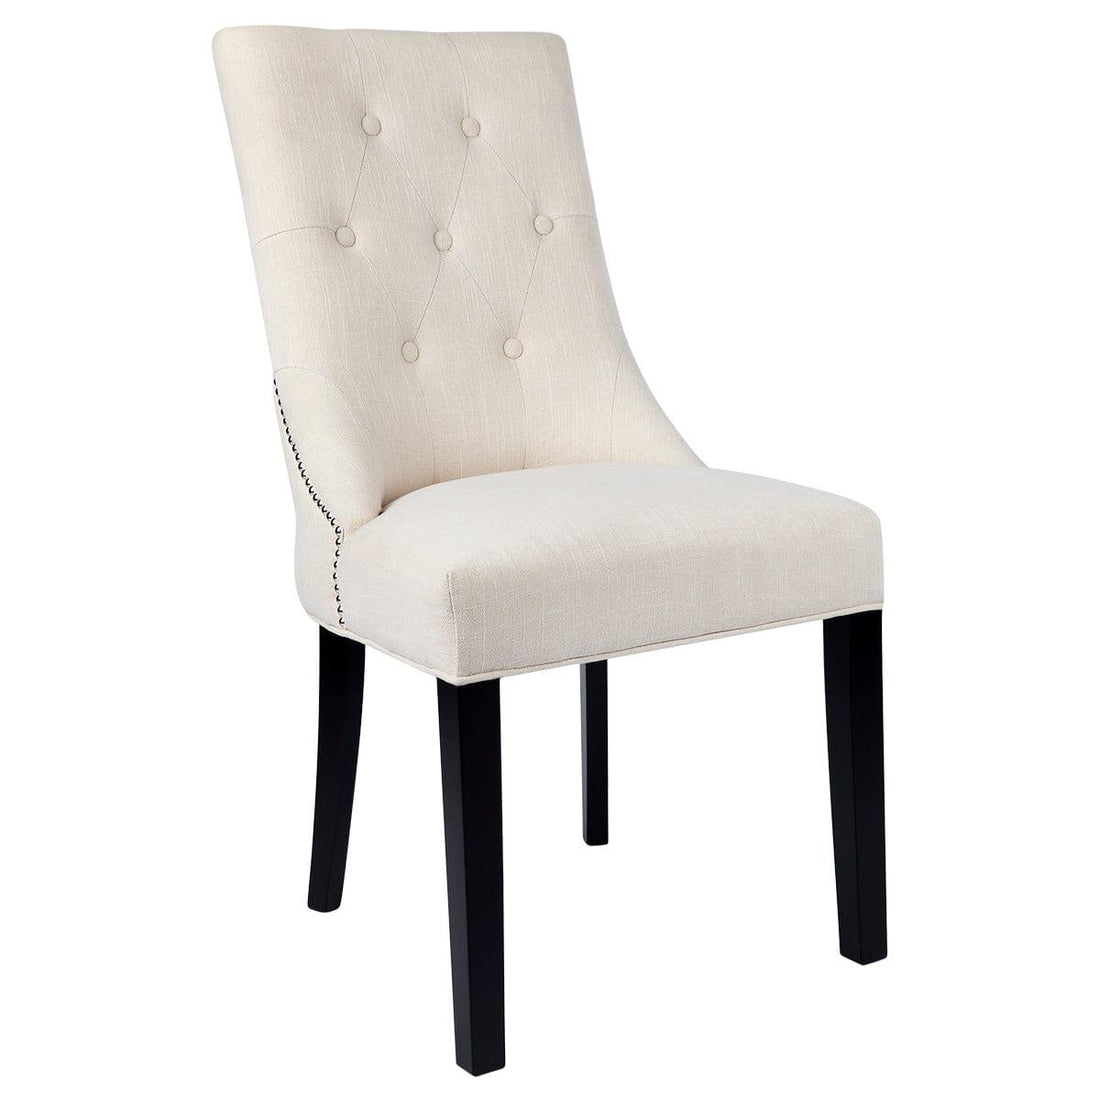 House Journey London Dining Chair - Natural Linen